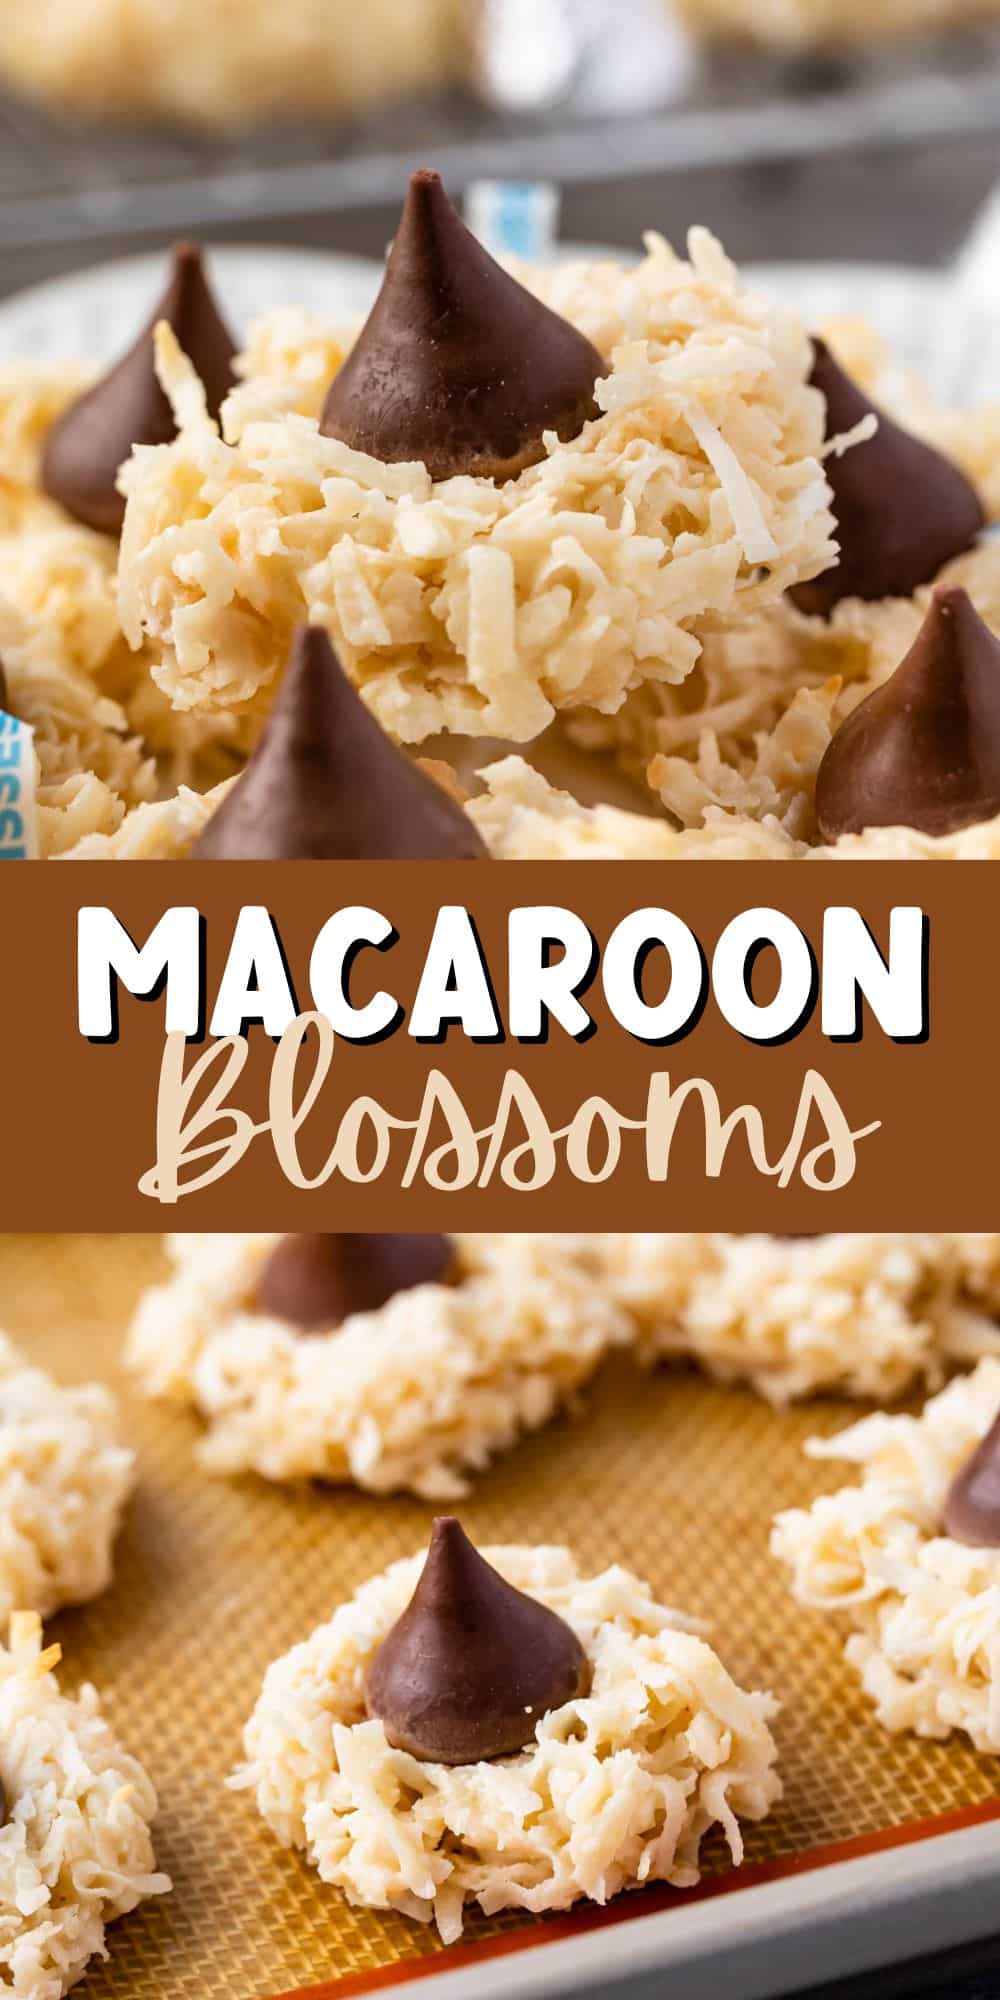 macaroon blossoms laid out on plates and pans with words in the middle